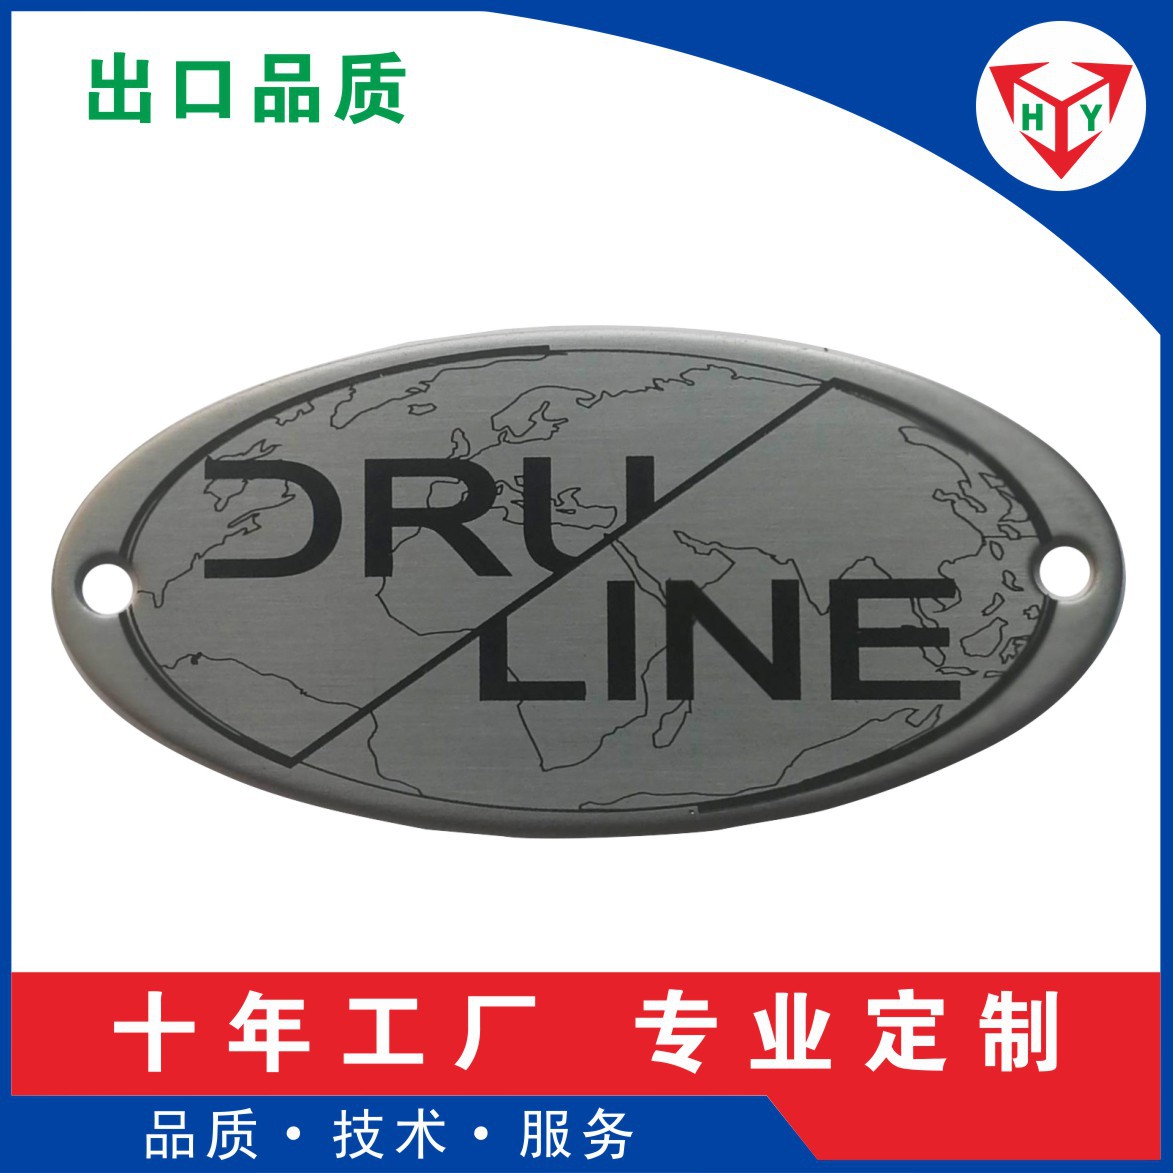 Corrosion stainless steel Steel Signage household electrical appliances equipment furniture Door Industry Nameplate Silk screen Highlight stamping Label customized